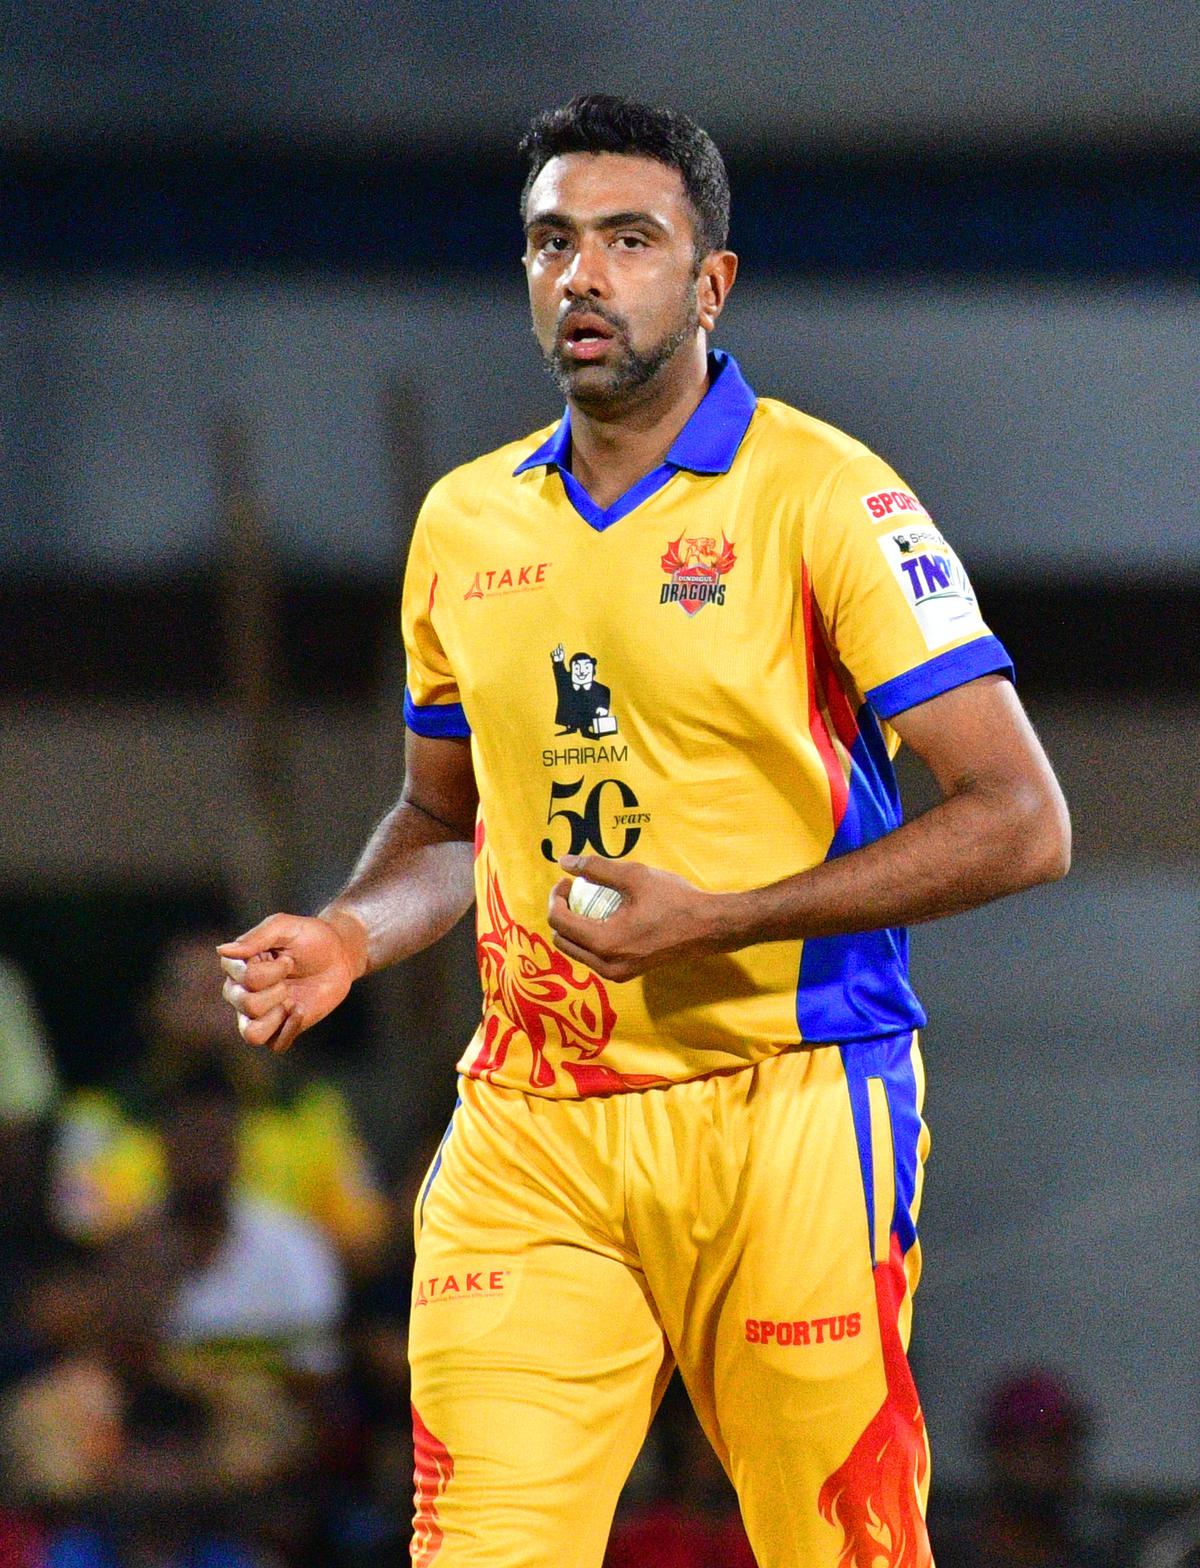 Due to Ashwin's dedication, he made it to the TNPL after the WTC Final.